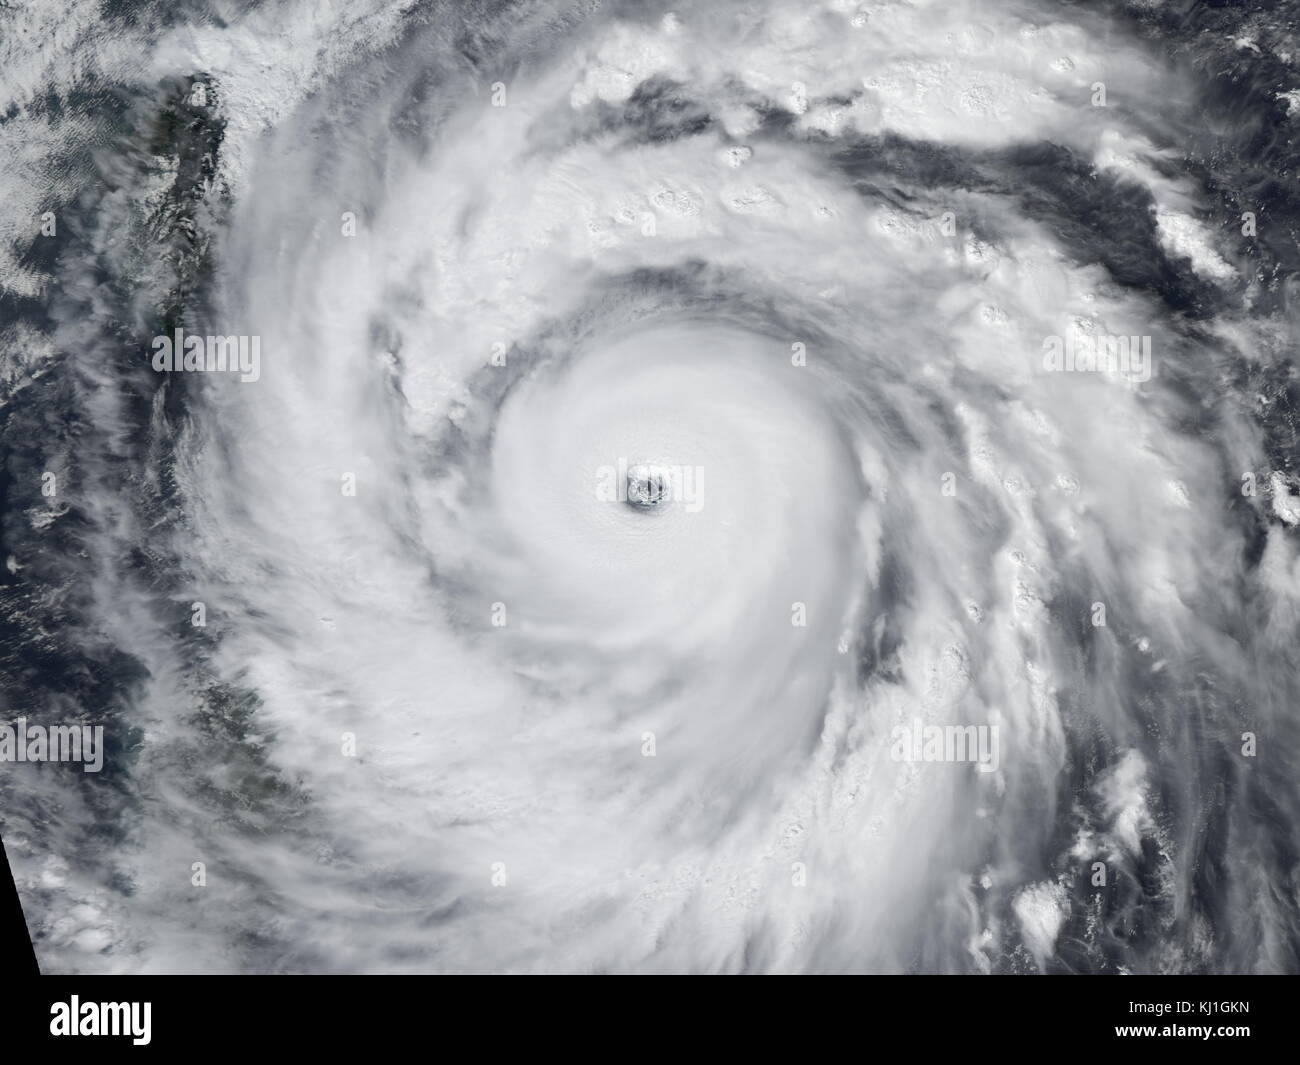 Typhoon Jangmi (pronounced [t?a?.mi]), known in the Philippines as Typhoon Ofel, was the most intense tropical cyclone in the Northwest Pacific Ocean during the 2000s Stock Photo